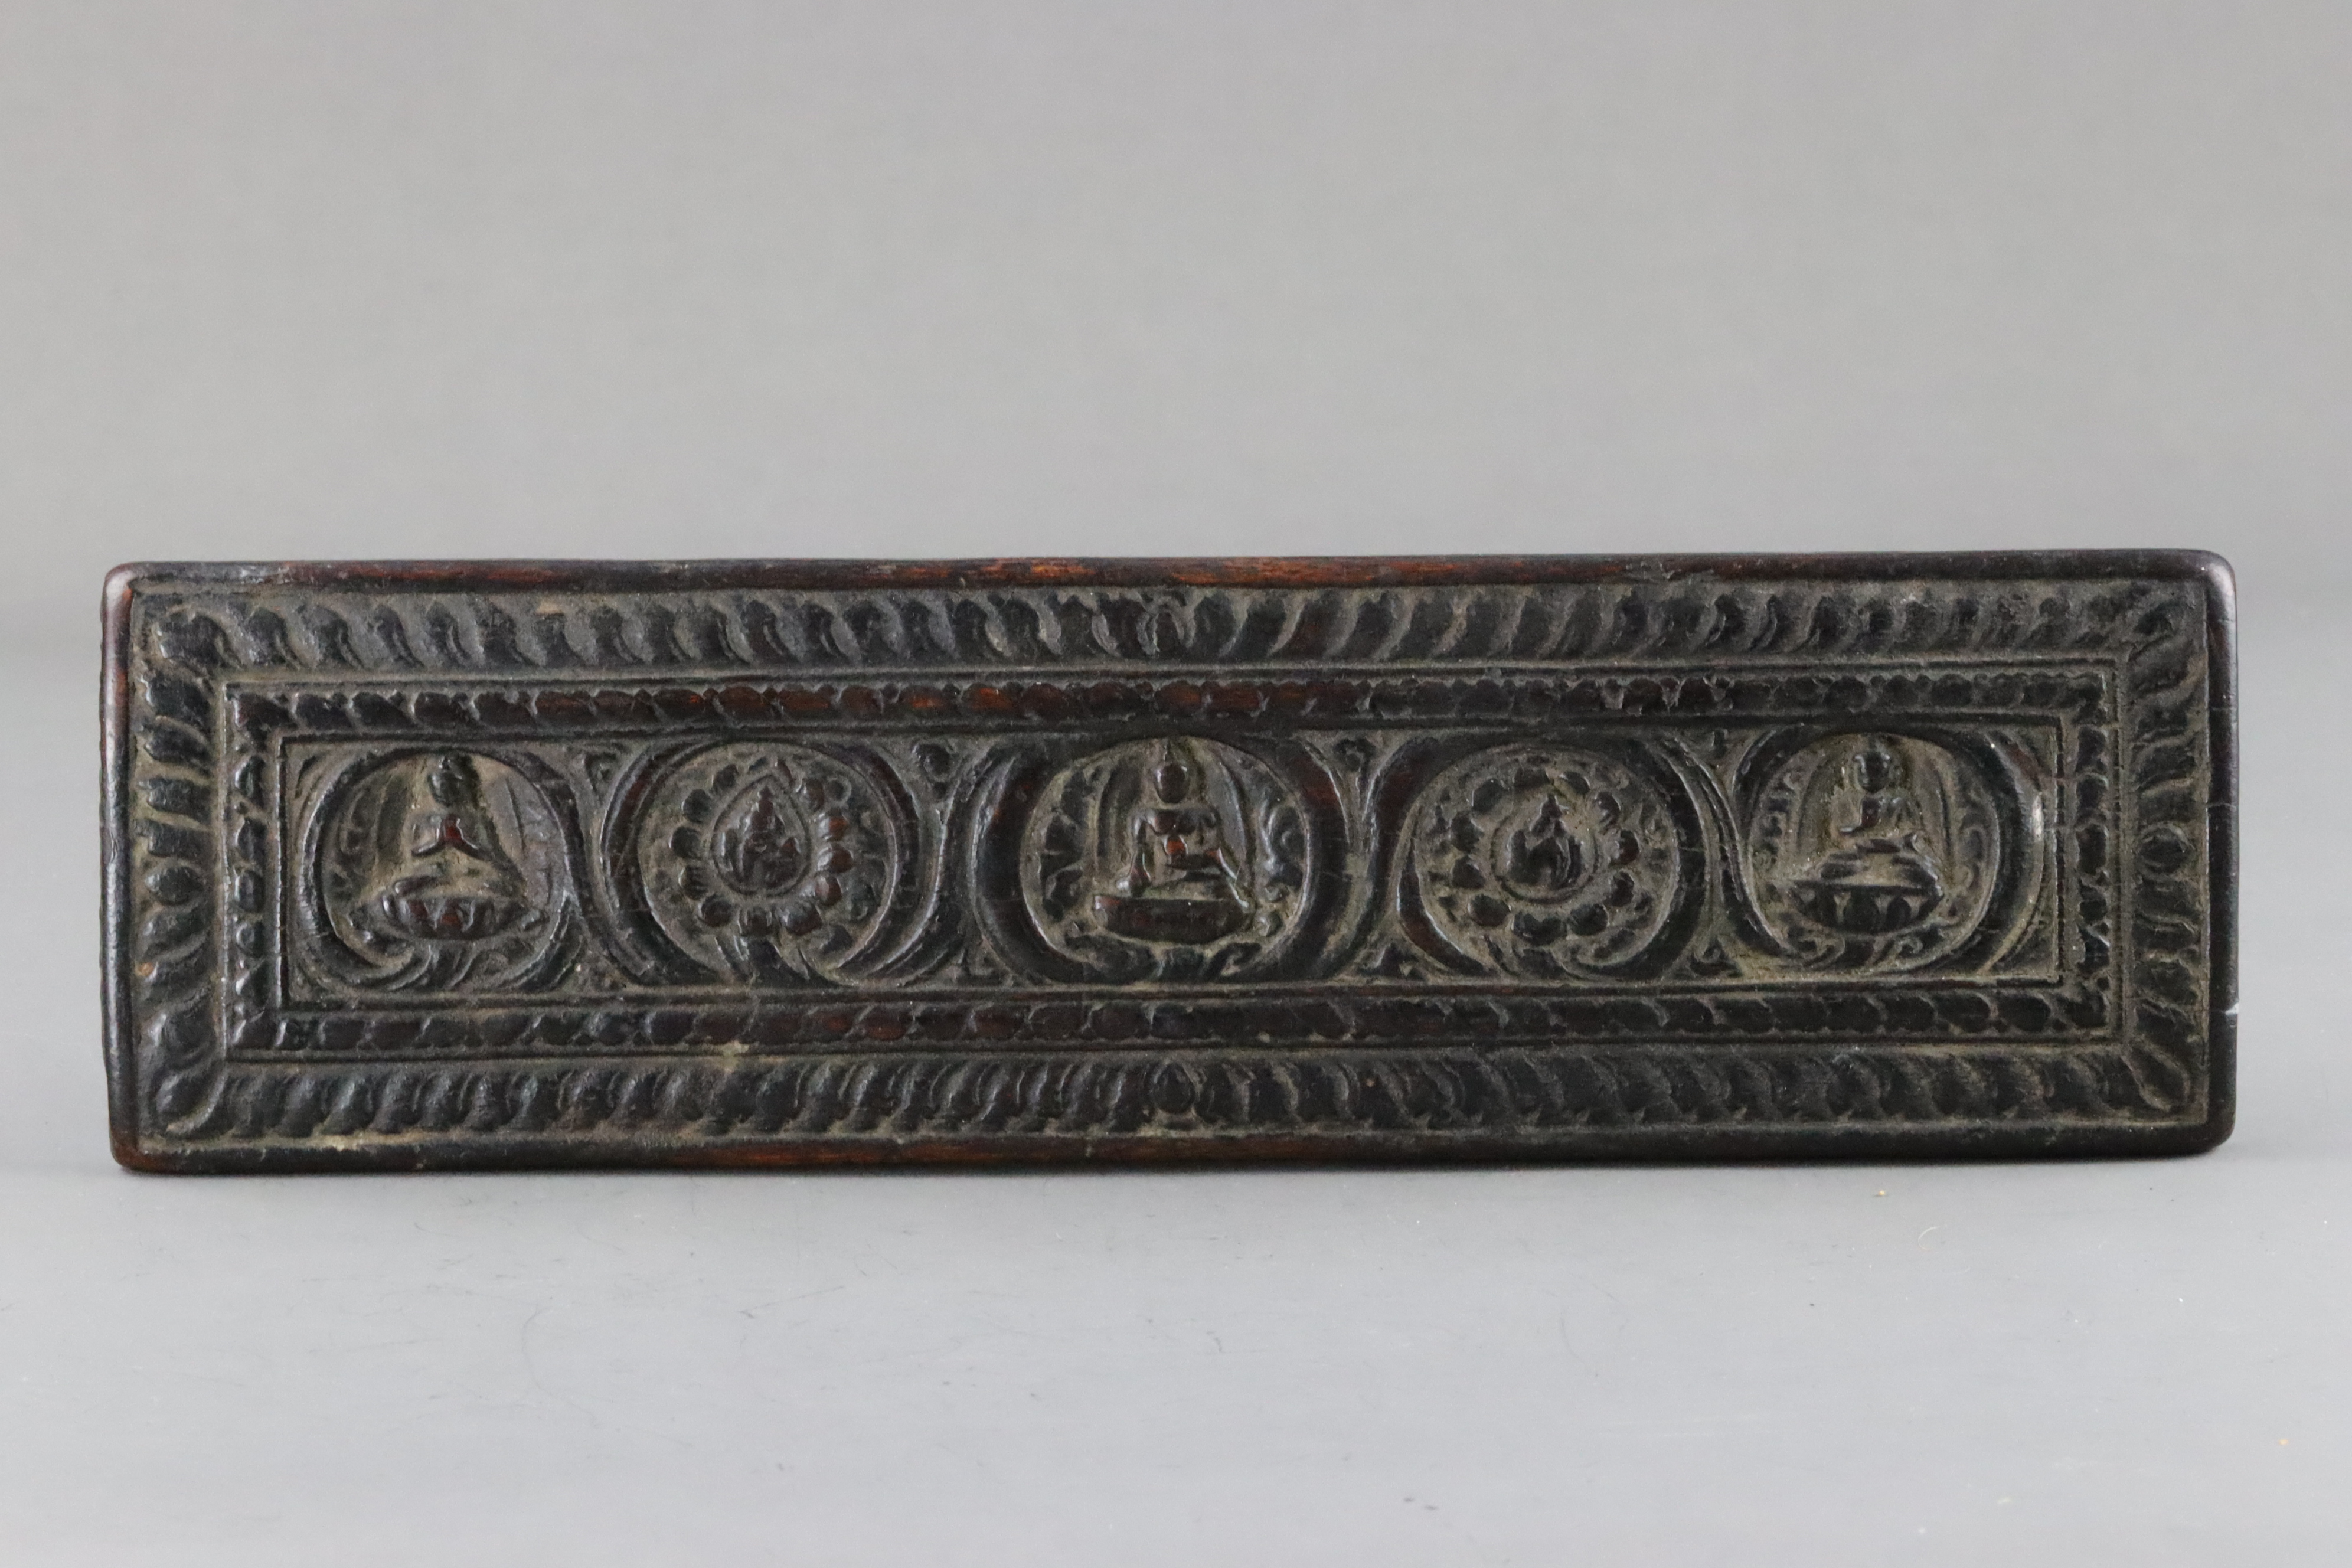 A Blackwood Book Cover carved with Buddhas, 15th century - Image 6 of 8